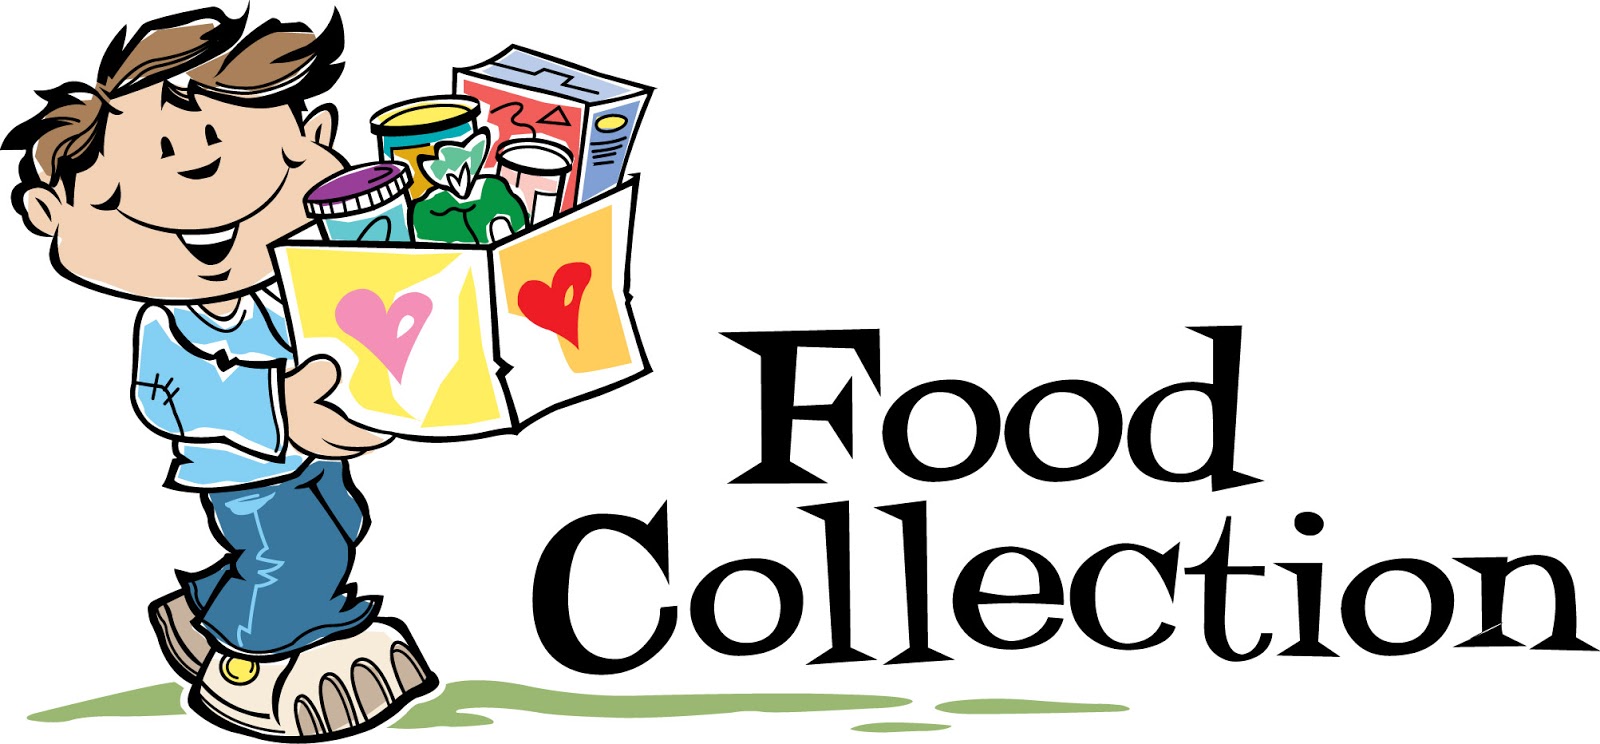 Food Donation Clipart